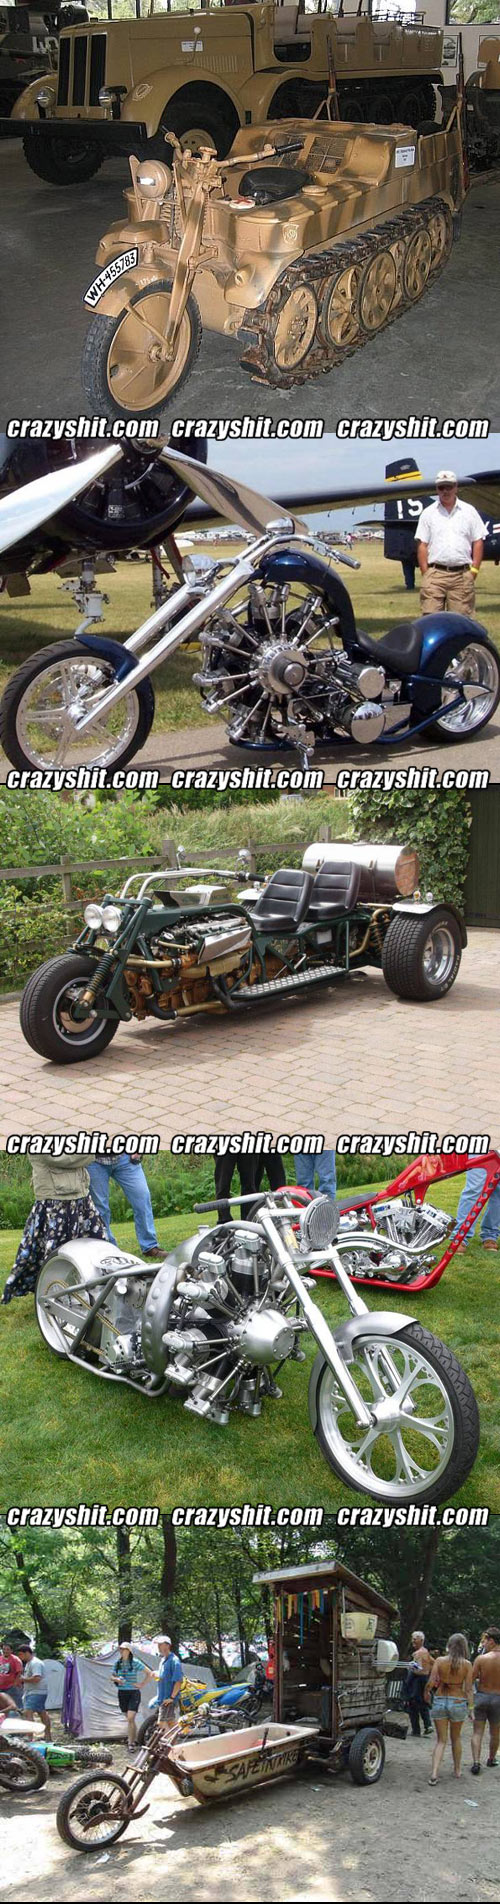 Check Out These Cool Custom Motorcycles